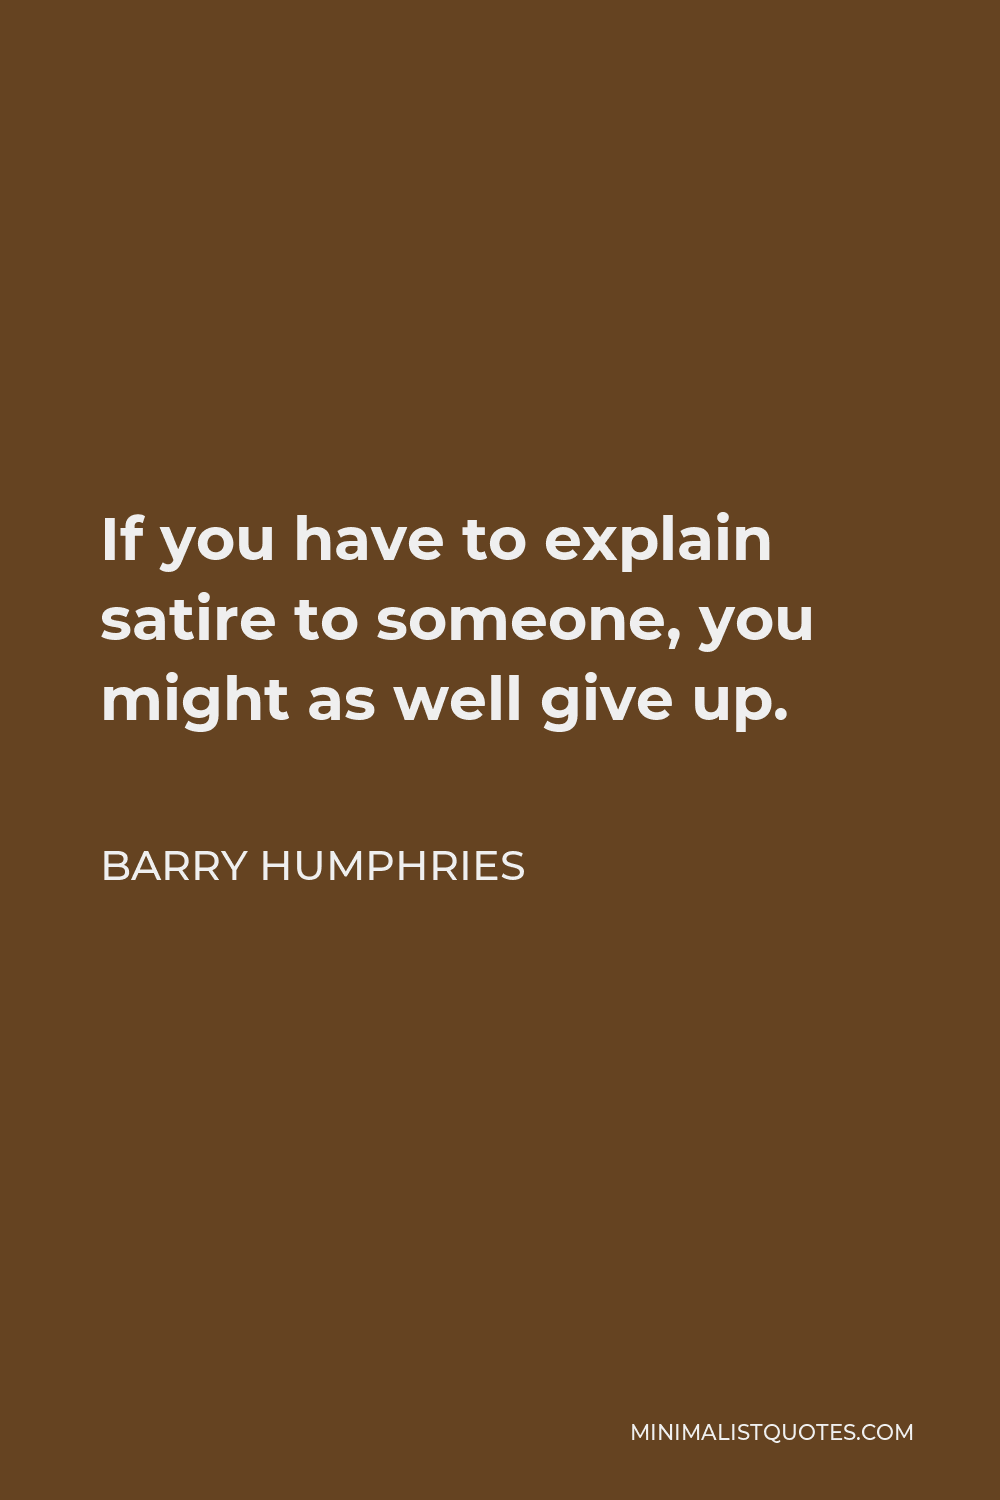 Barry Humphries Quote - If you have to explain satire to someone, you might as well give up.